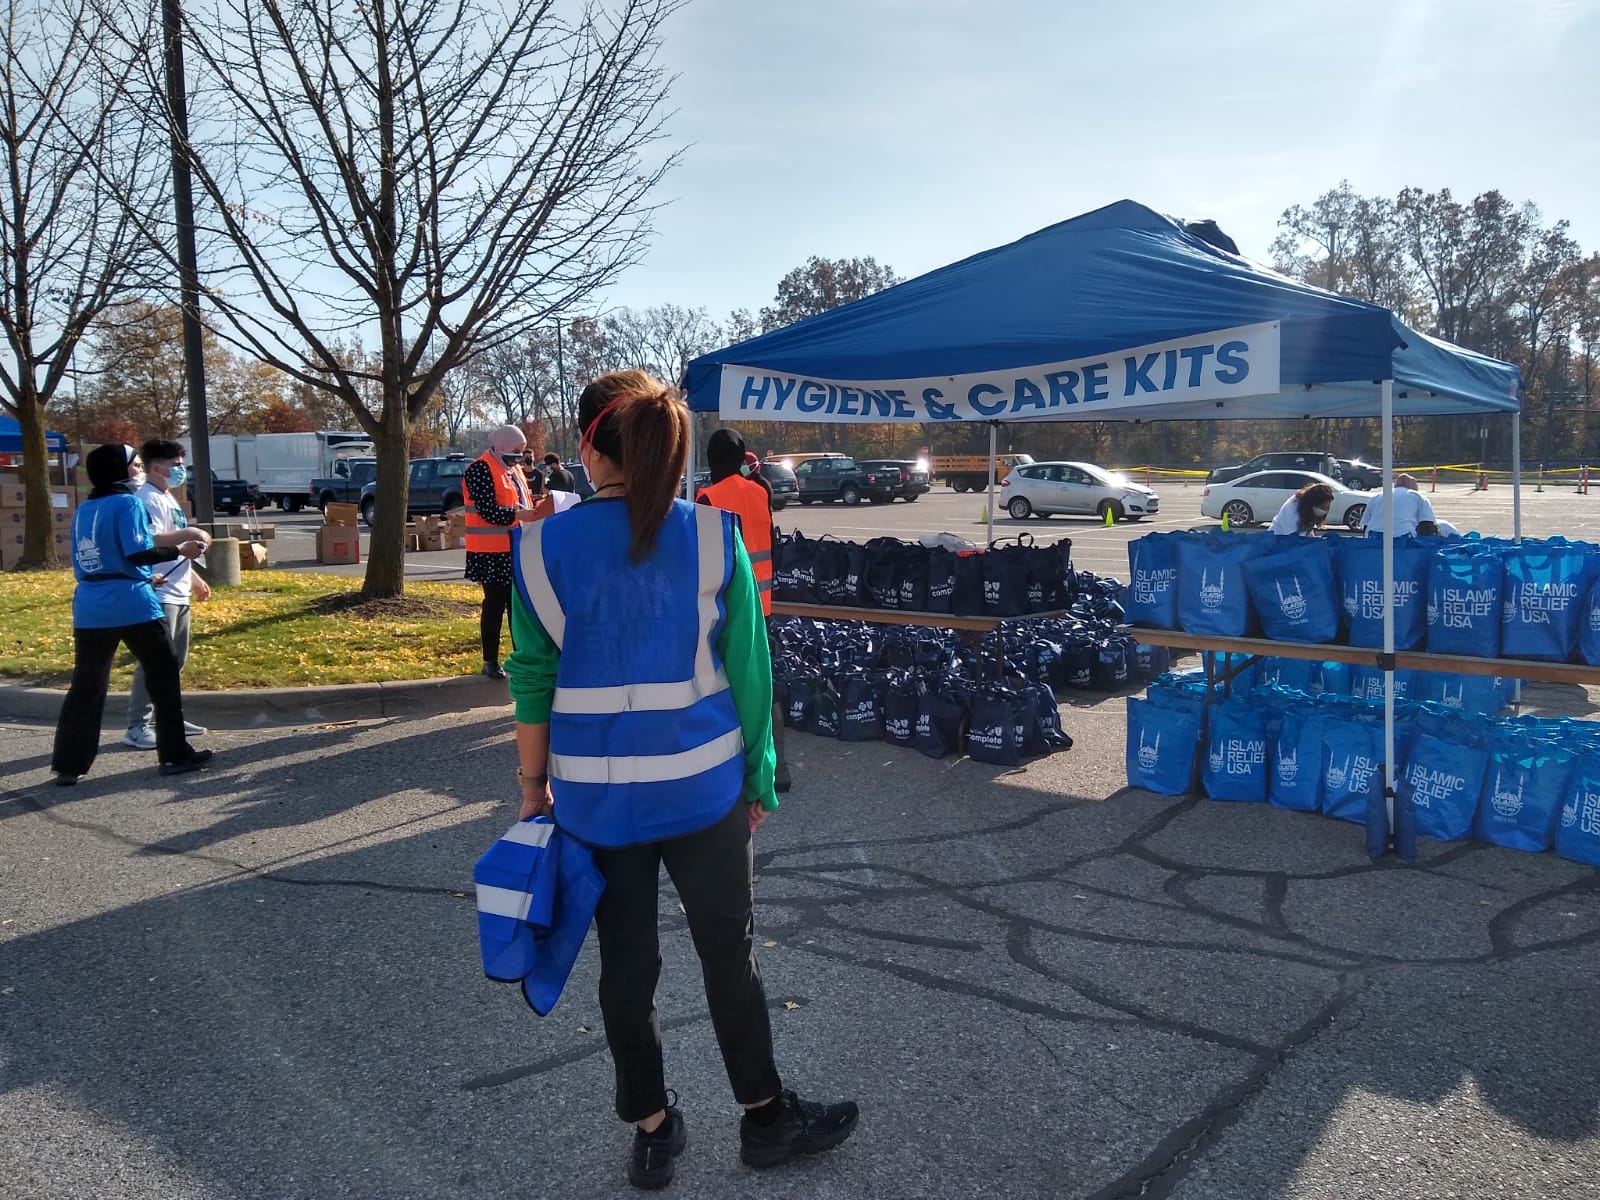 Photo of hygiene and care tent and volunteers at Day of Dignity event in Dearborn, Nov. 7, 2020